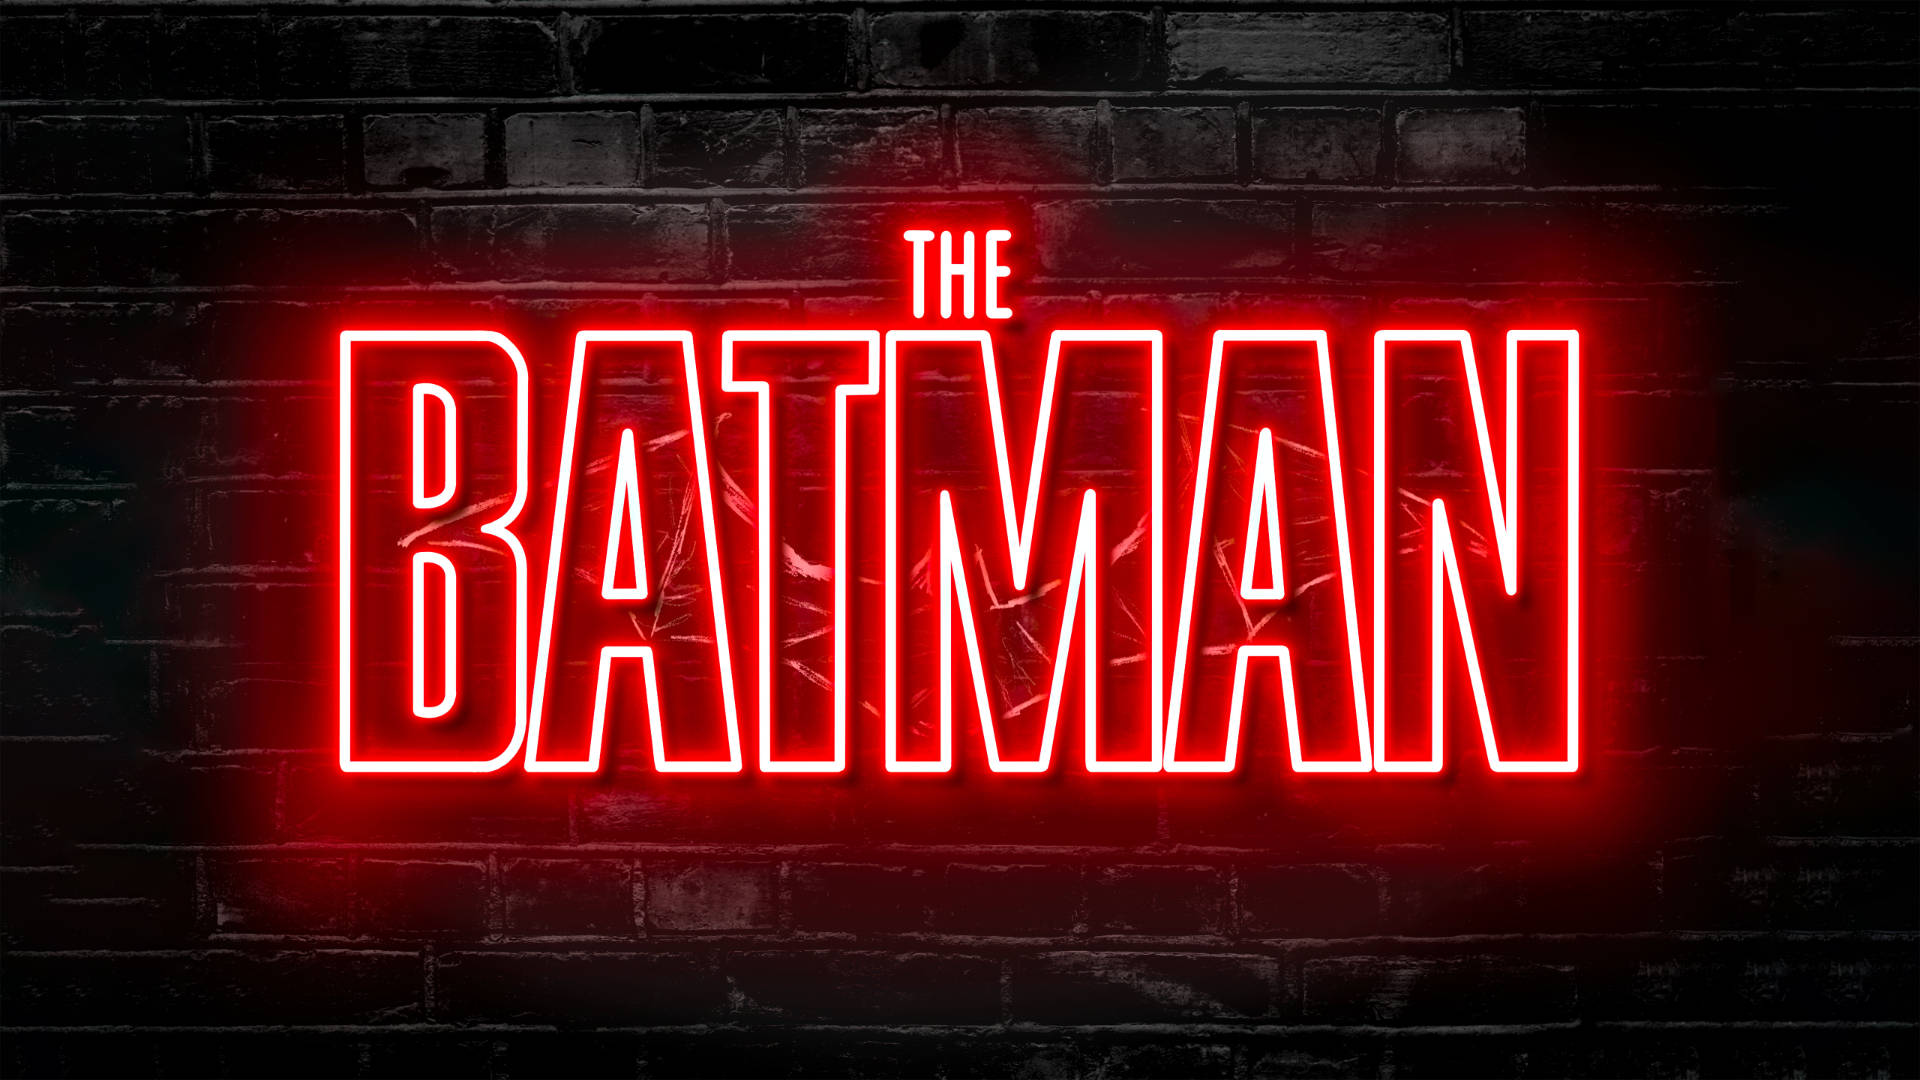 The Batman Red Neon Lights Background